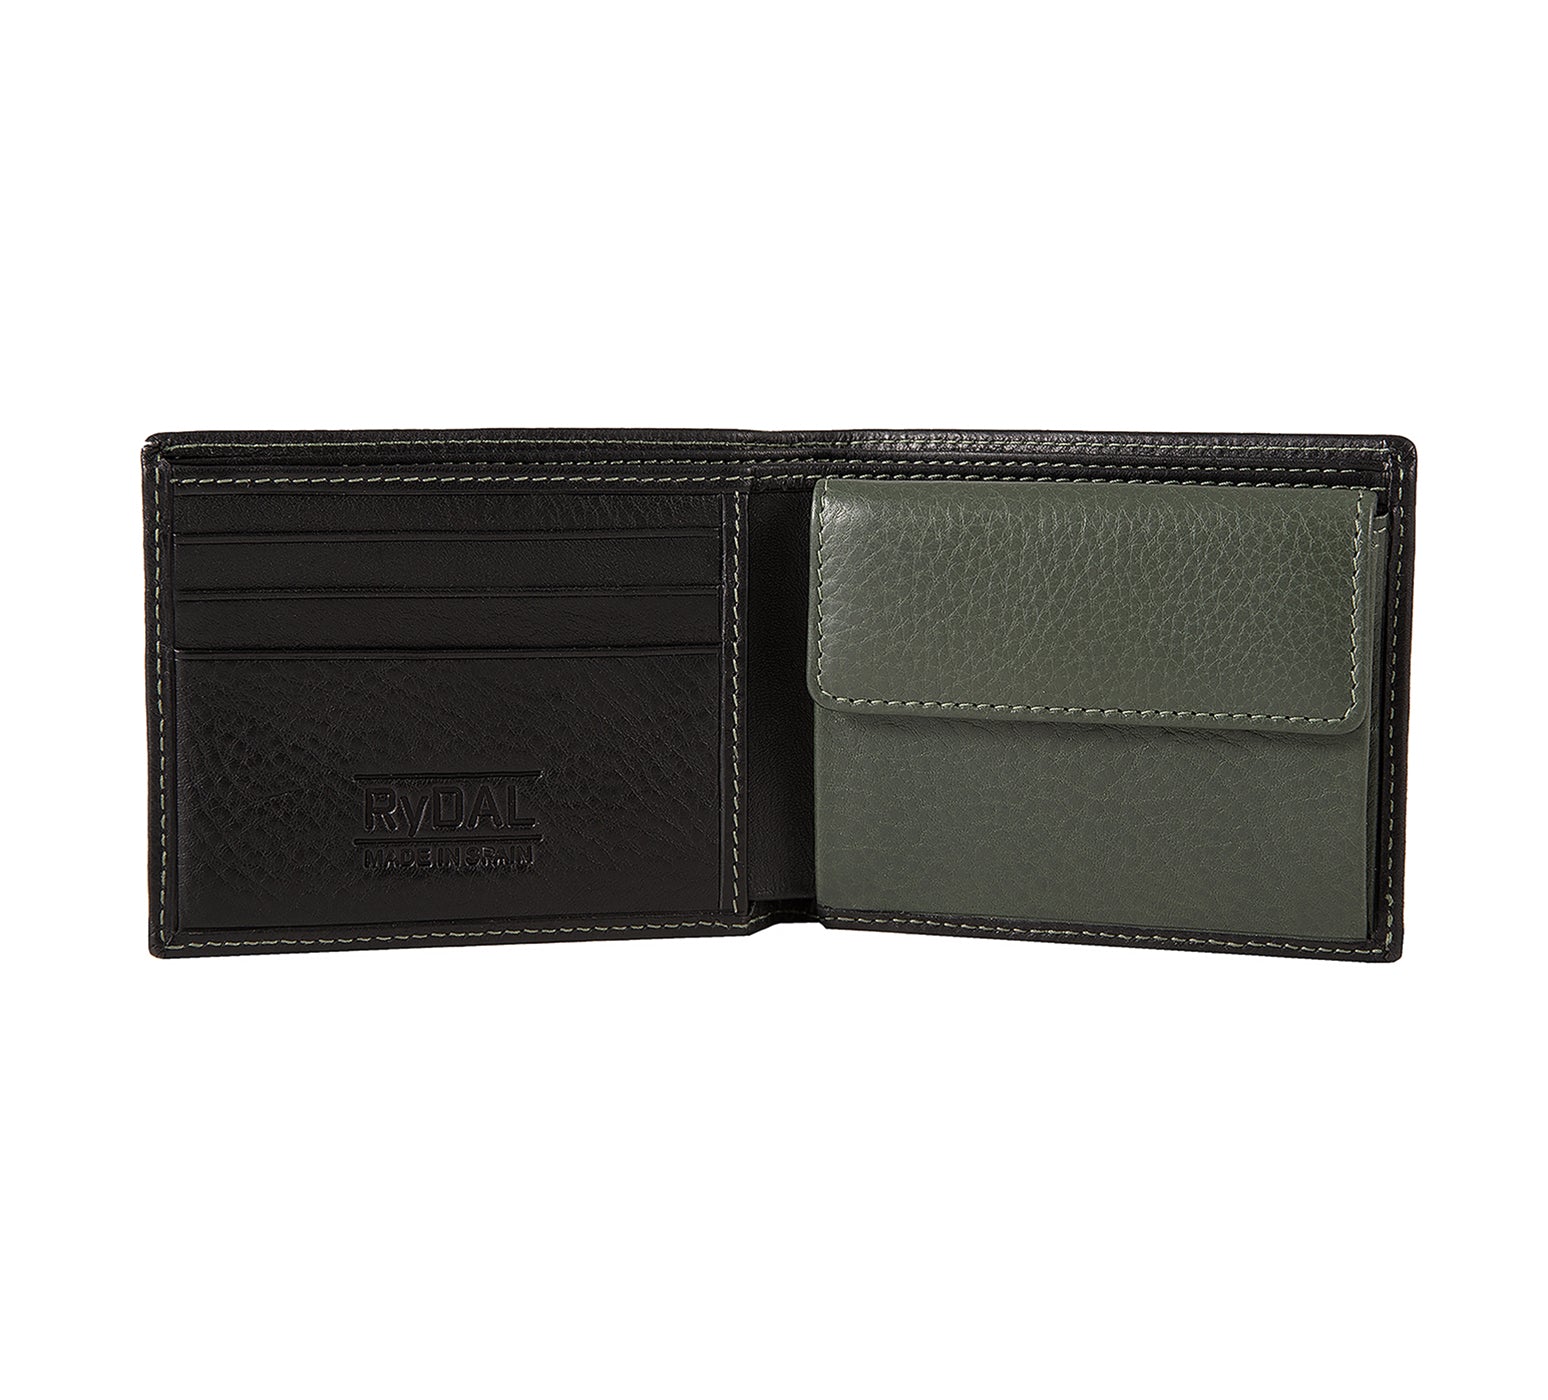 Mens Leather Wallet with Coin Pocket from Rydal in 'Black/Green' showing interior.